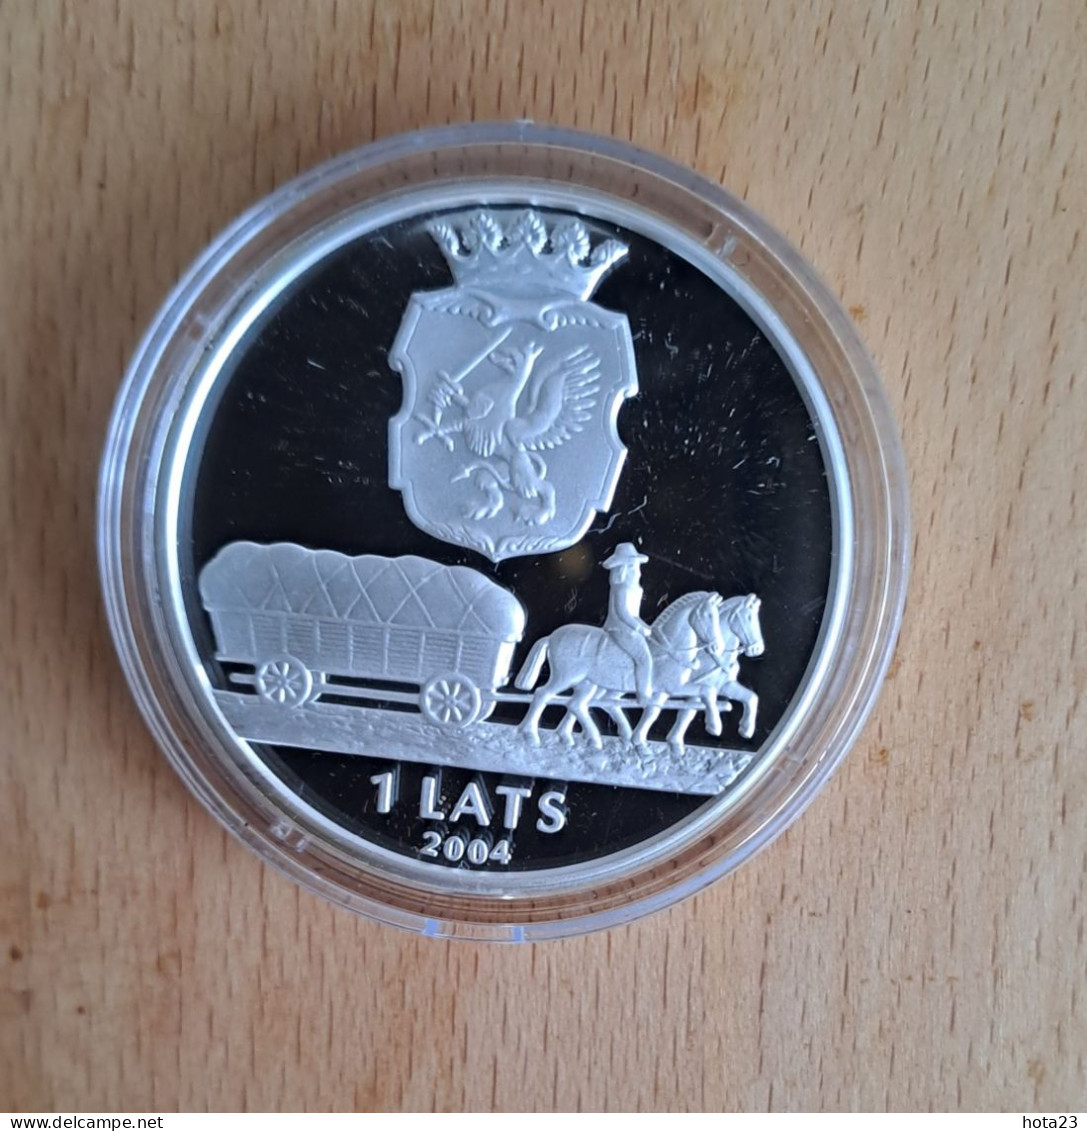 Latvia  , Lettonia , Lettland - 1 Lats Silver Coin  Vidzeme Horse Carriage ; Ploughboy   2004  Y Proof - Letland